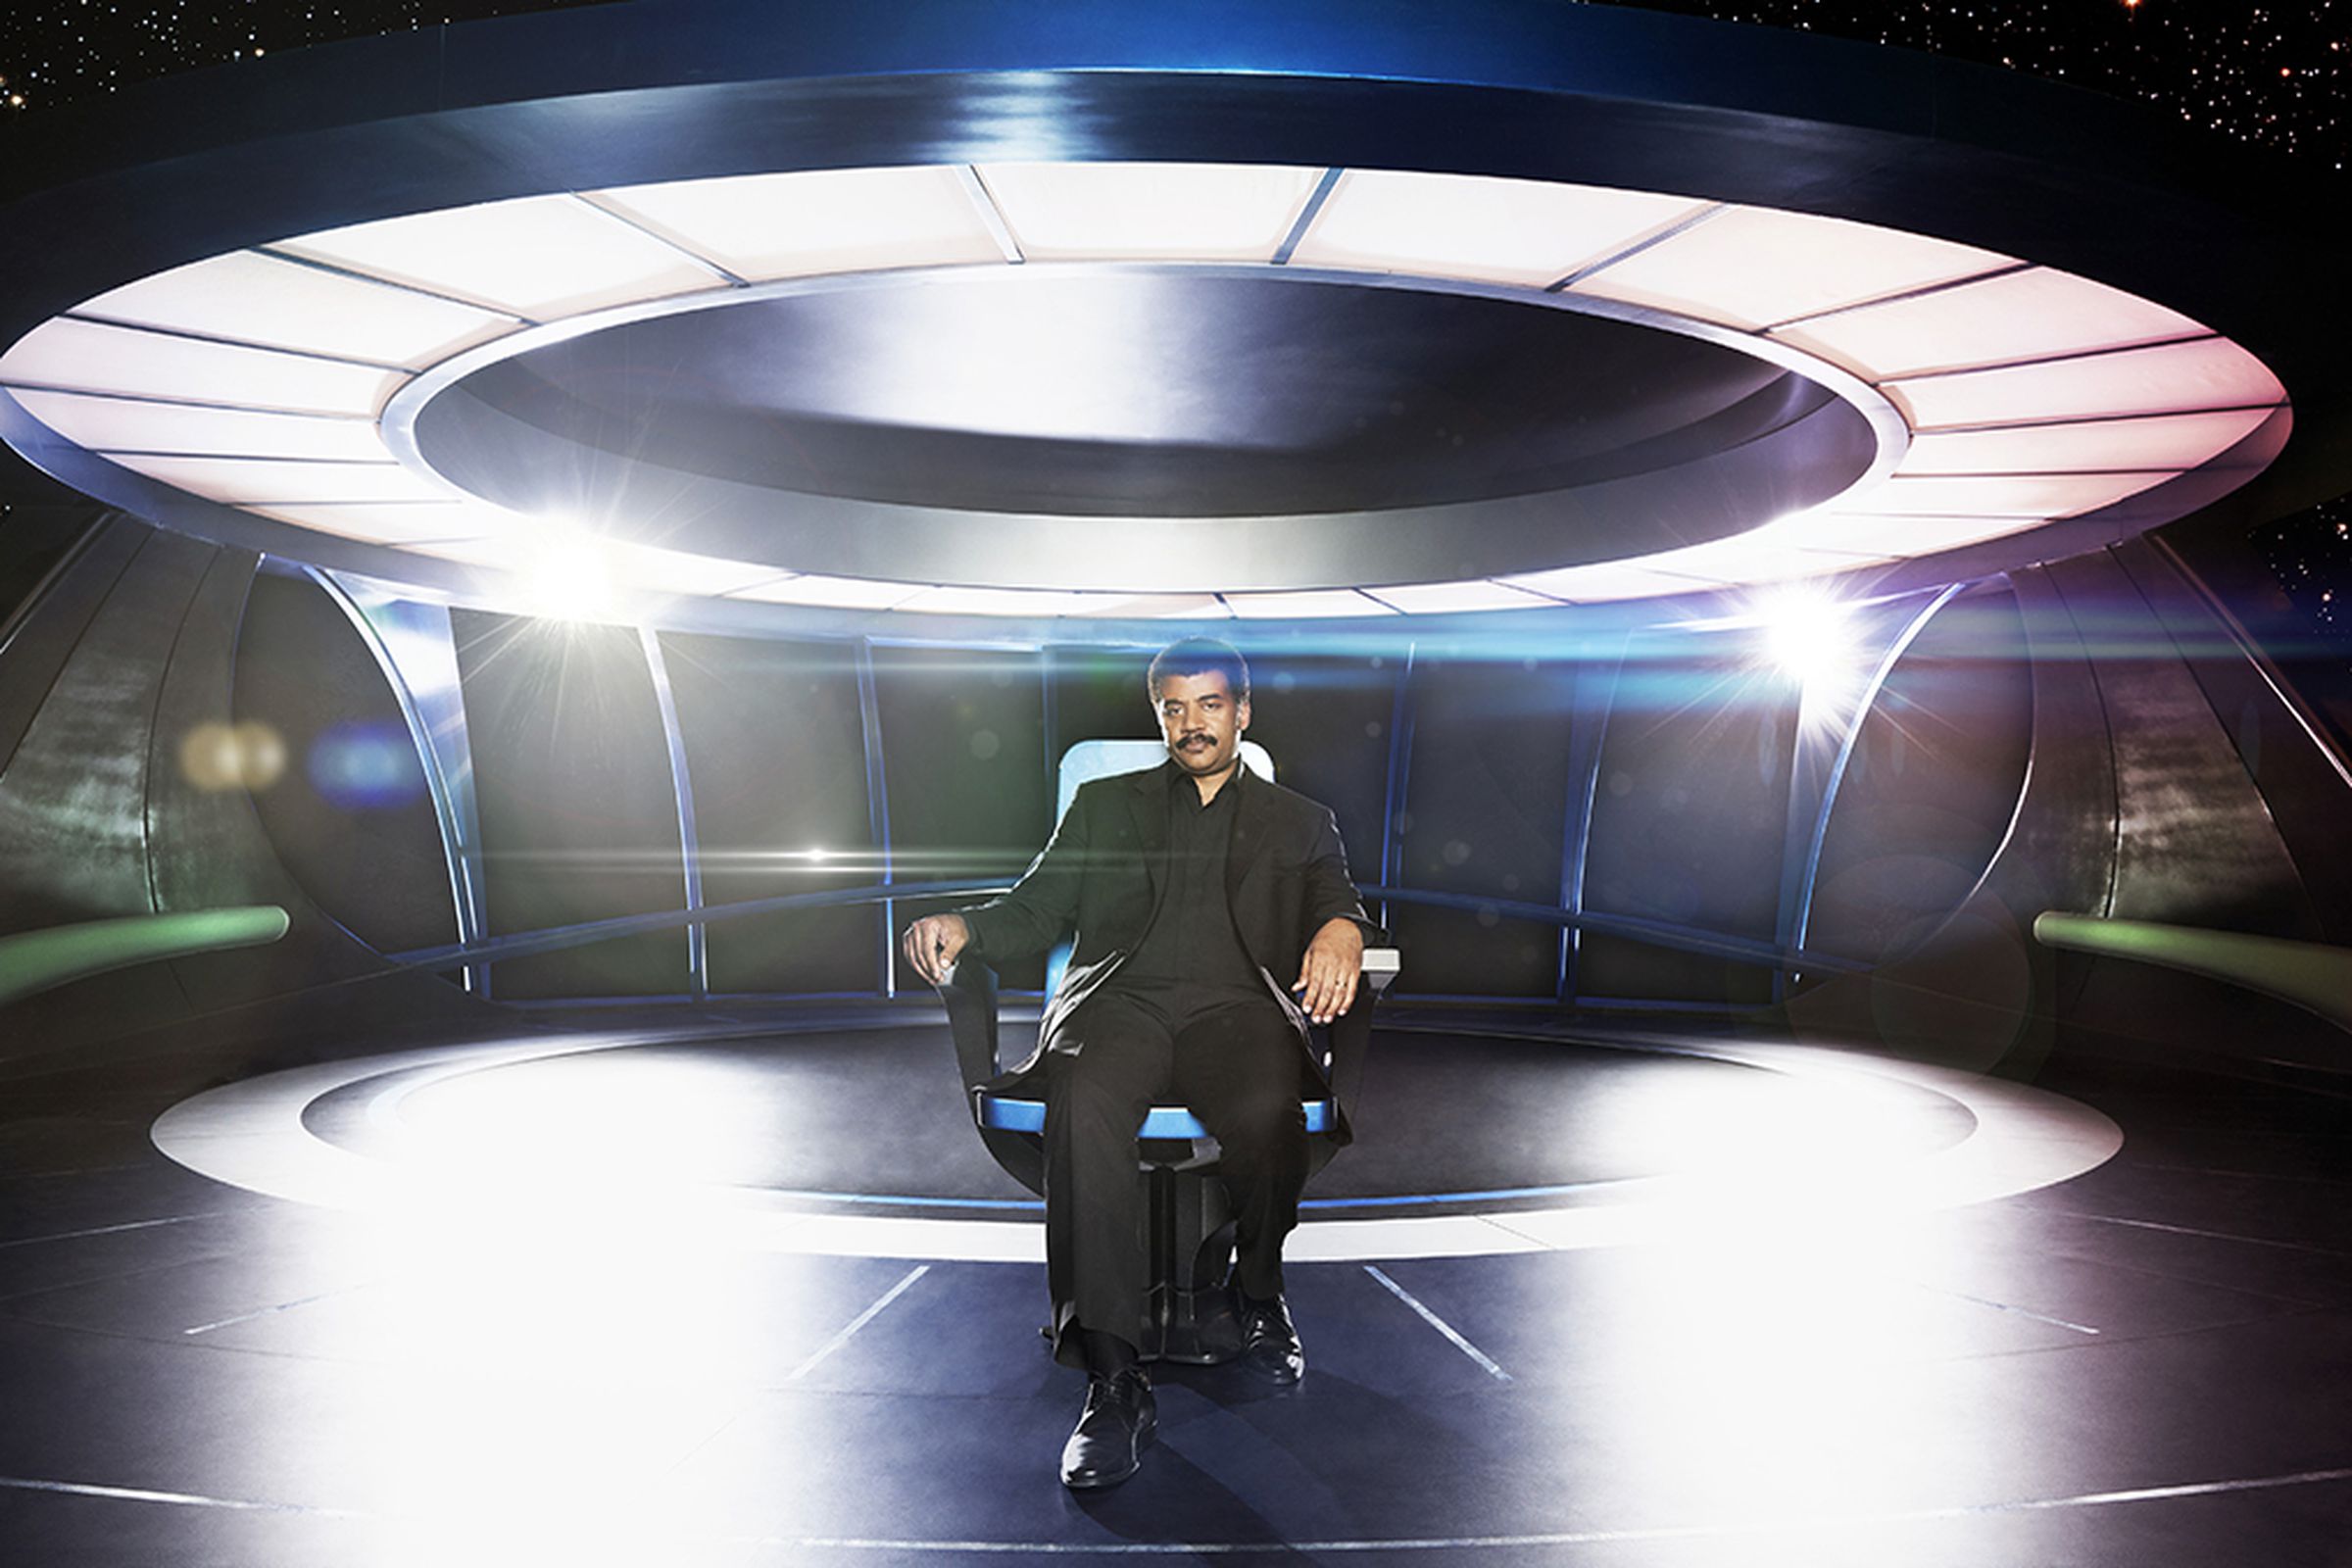 Neil deGrasse Tyson in a promotional image for Fox's 'Cosmos: A Spacetime Odyssey'